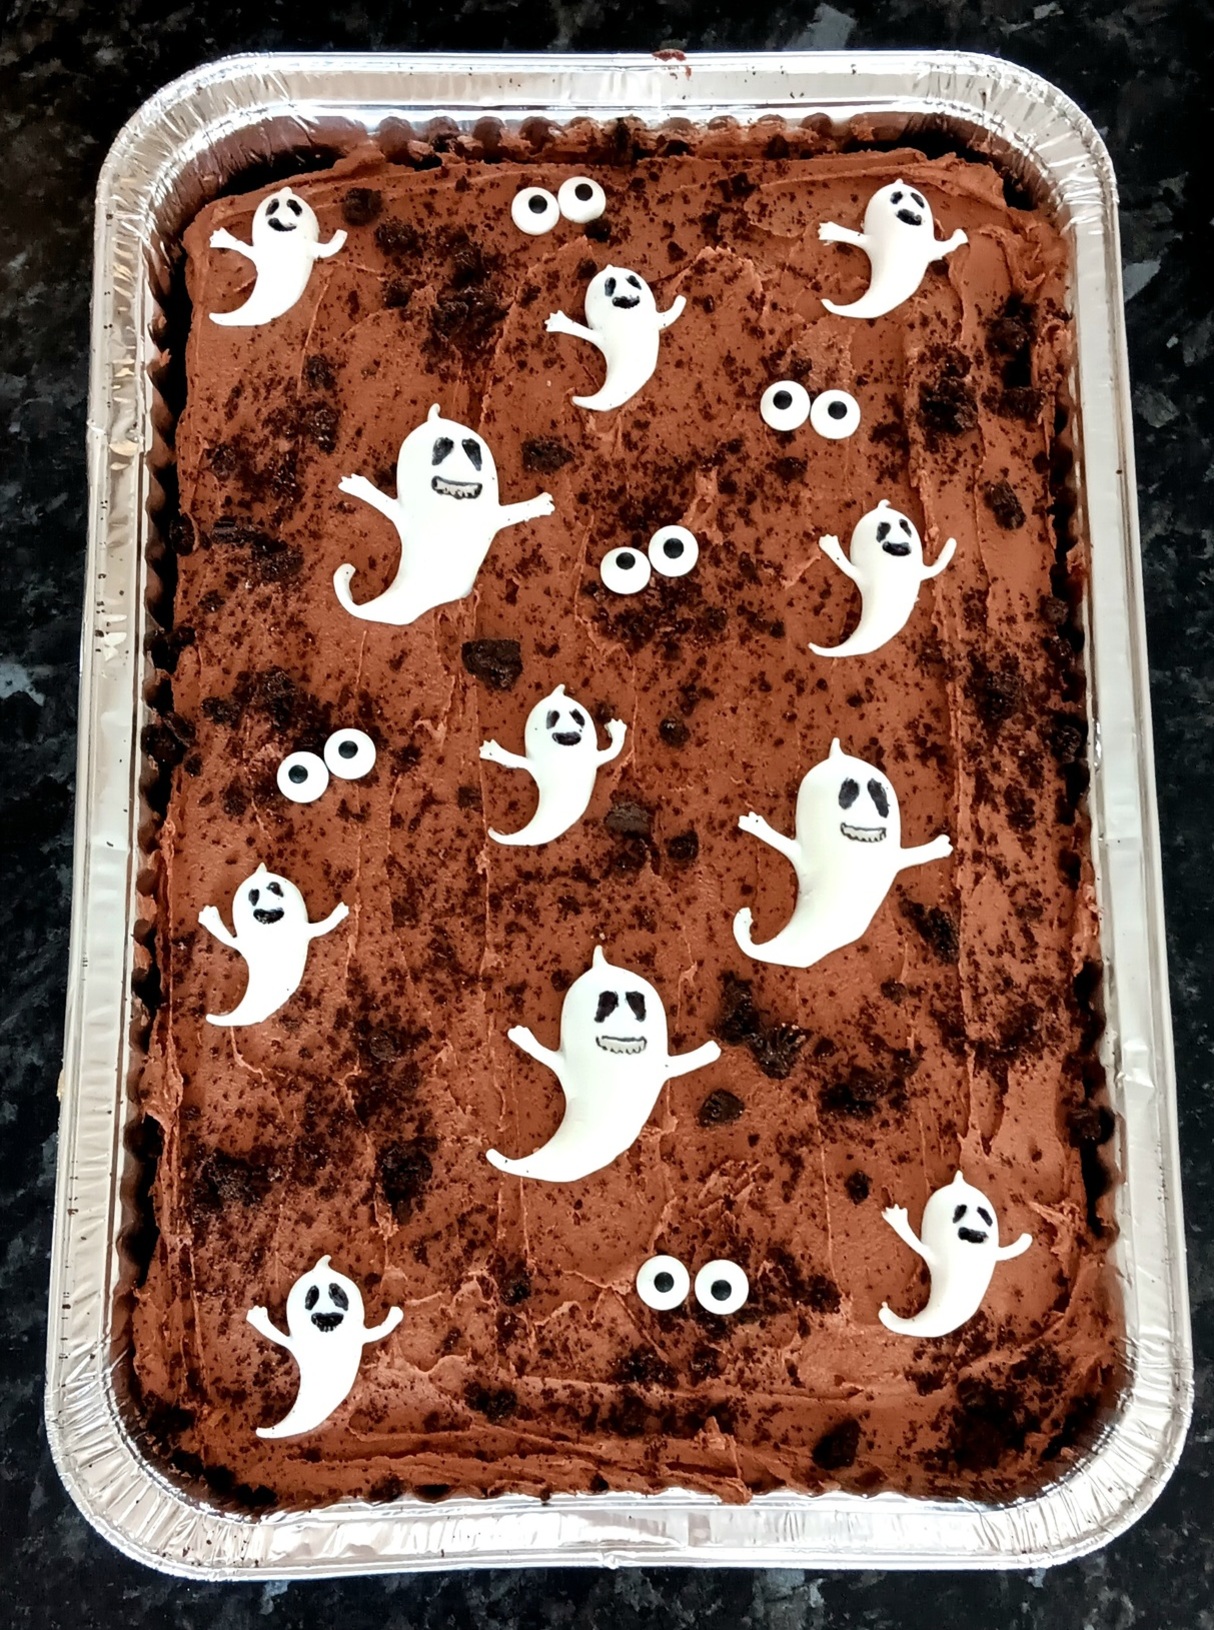 "Ghosts and goules" 12 x 9 chocolate traybake